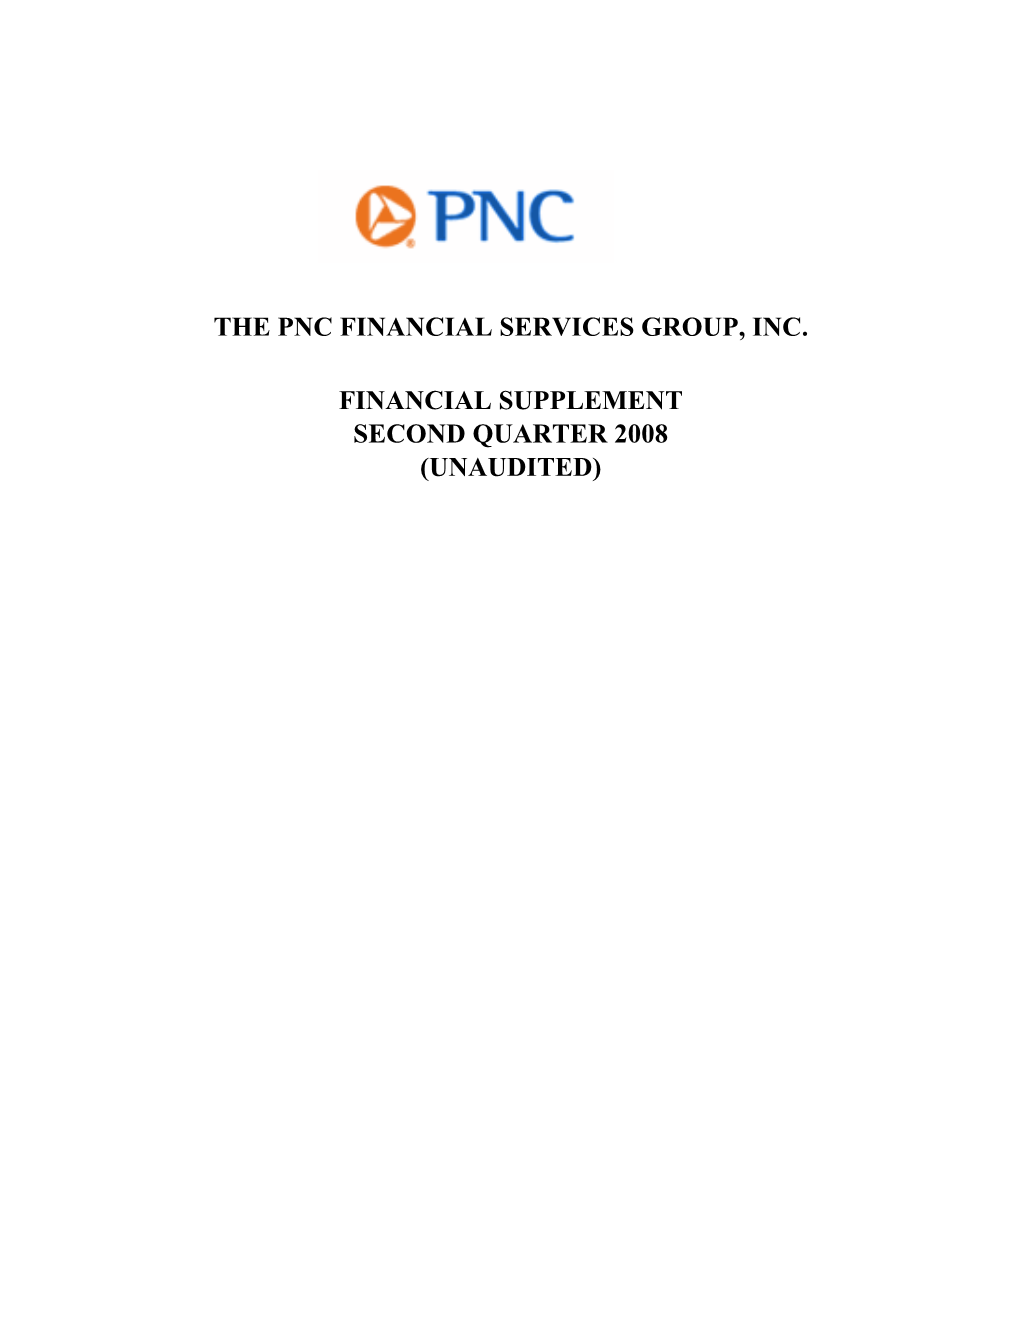 Unaudited) the Pnc Financial Services Group, Inc. Financial Supplement Second Quarter 2008 (Unaudited